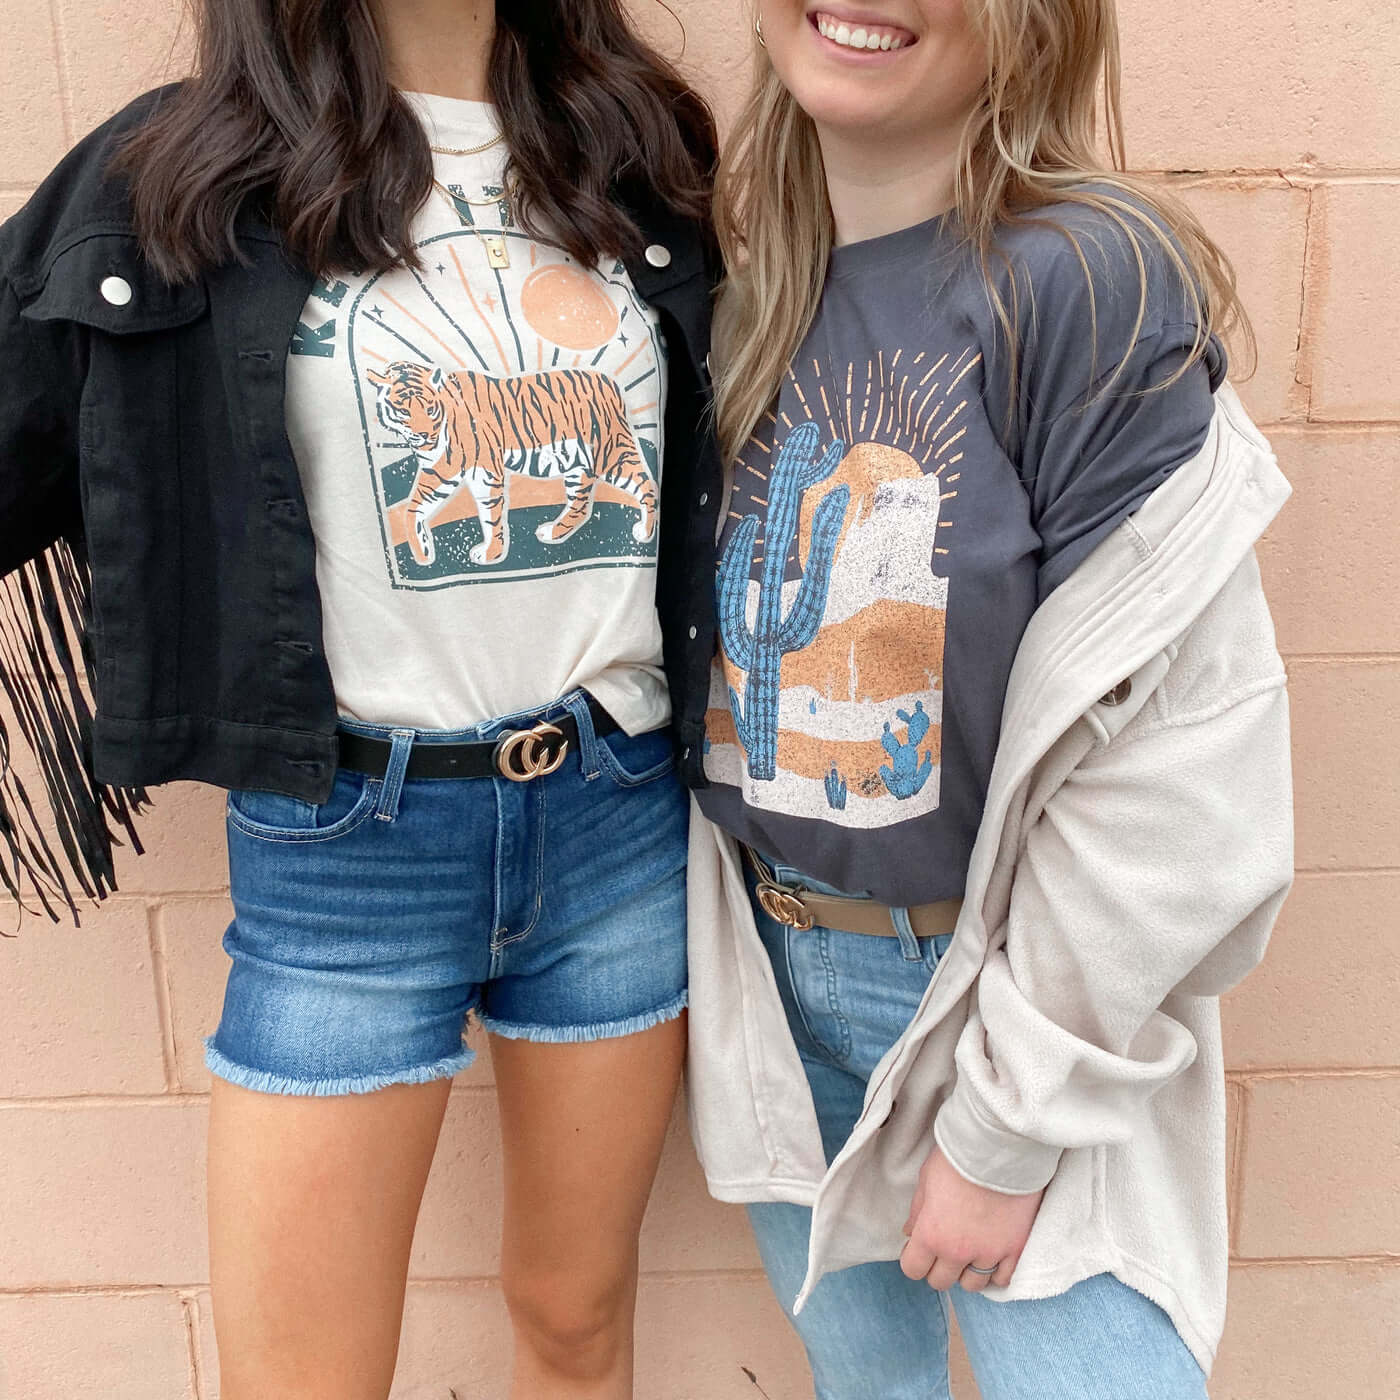 Women wearing graphic tees, shackets, and denim.